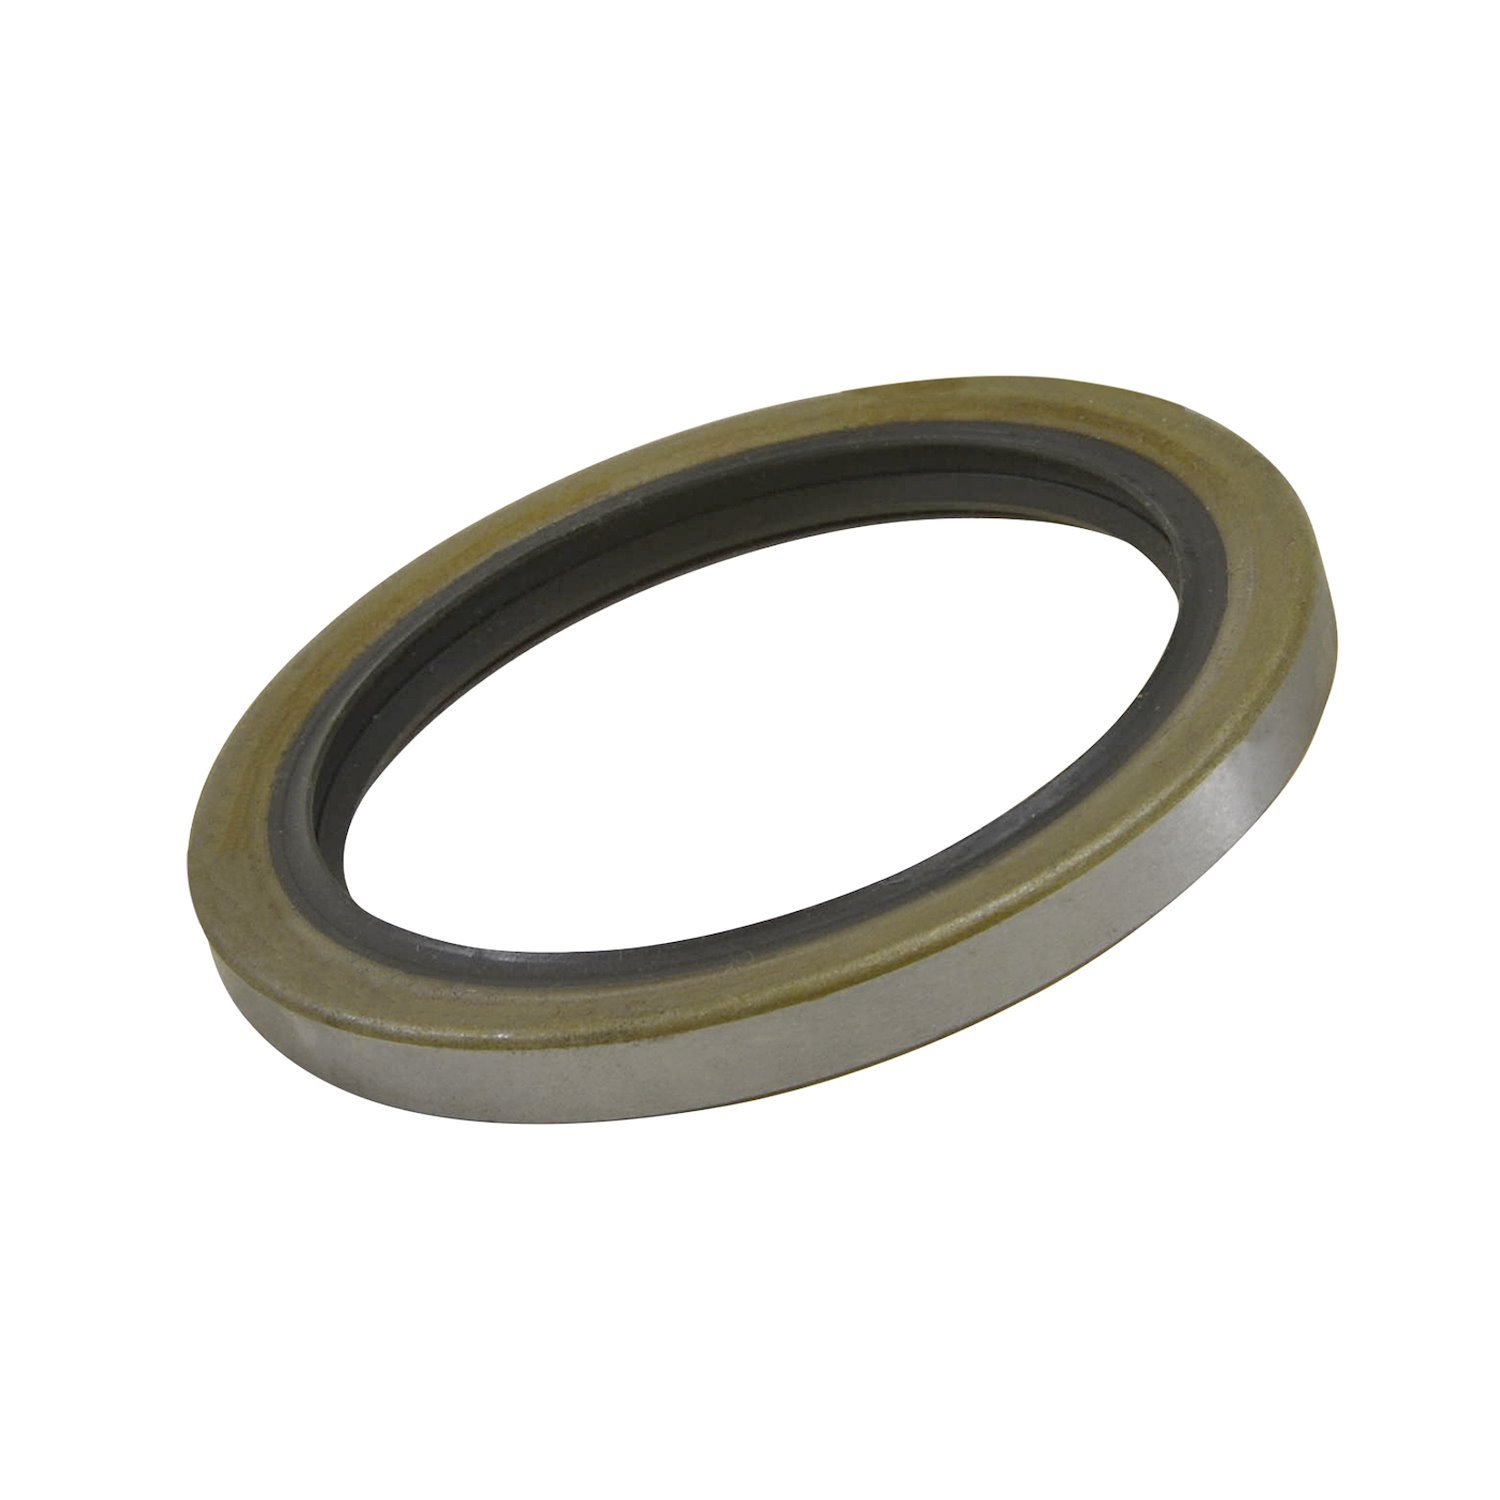 8.75 in. Chrysler Outer Axle Seal, Use W/Set7